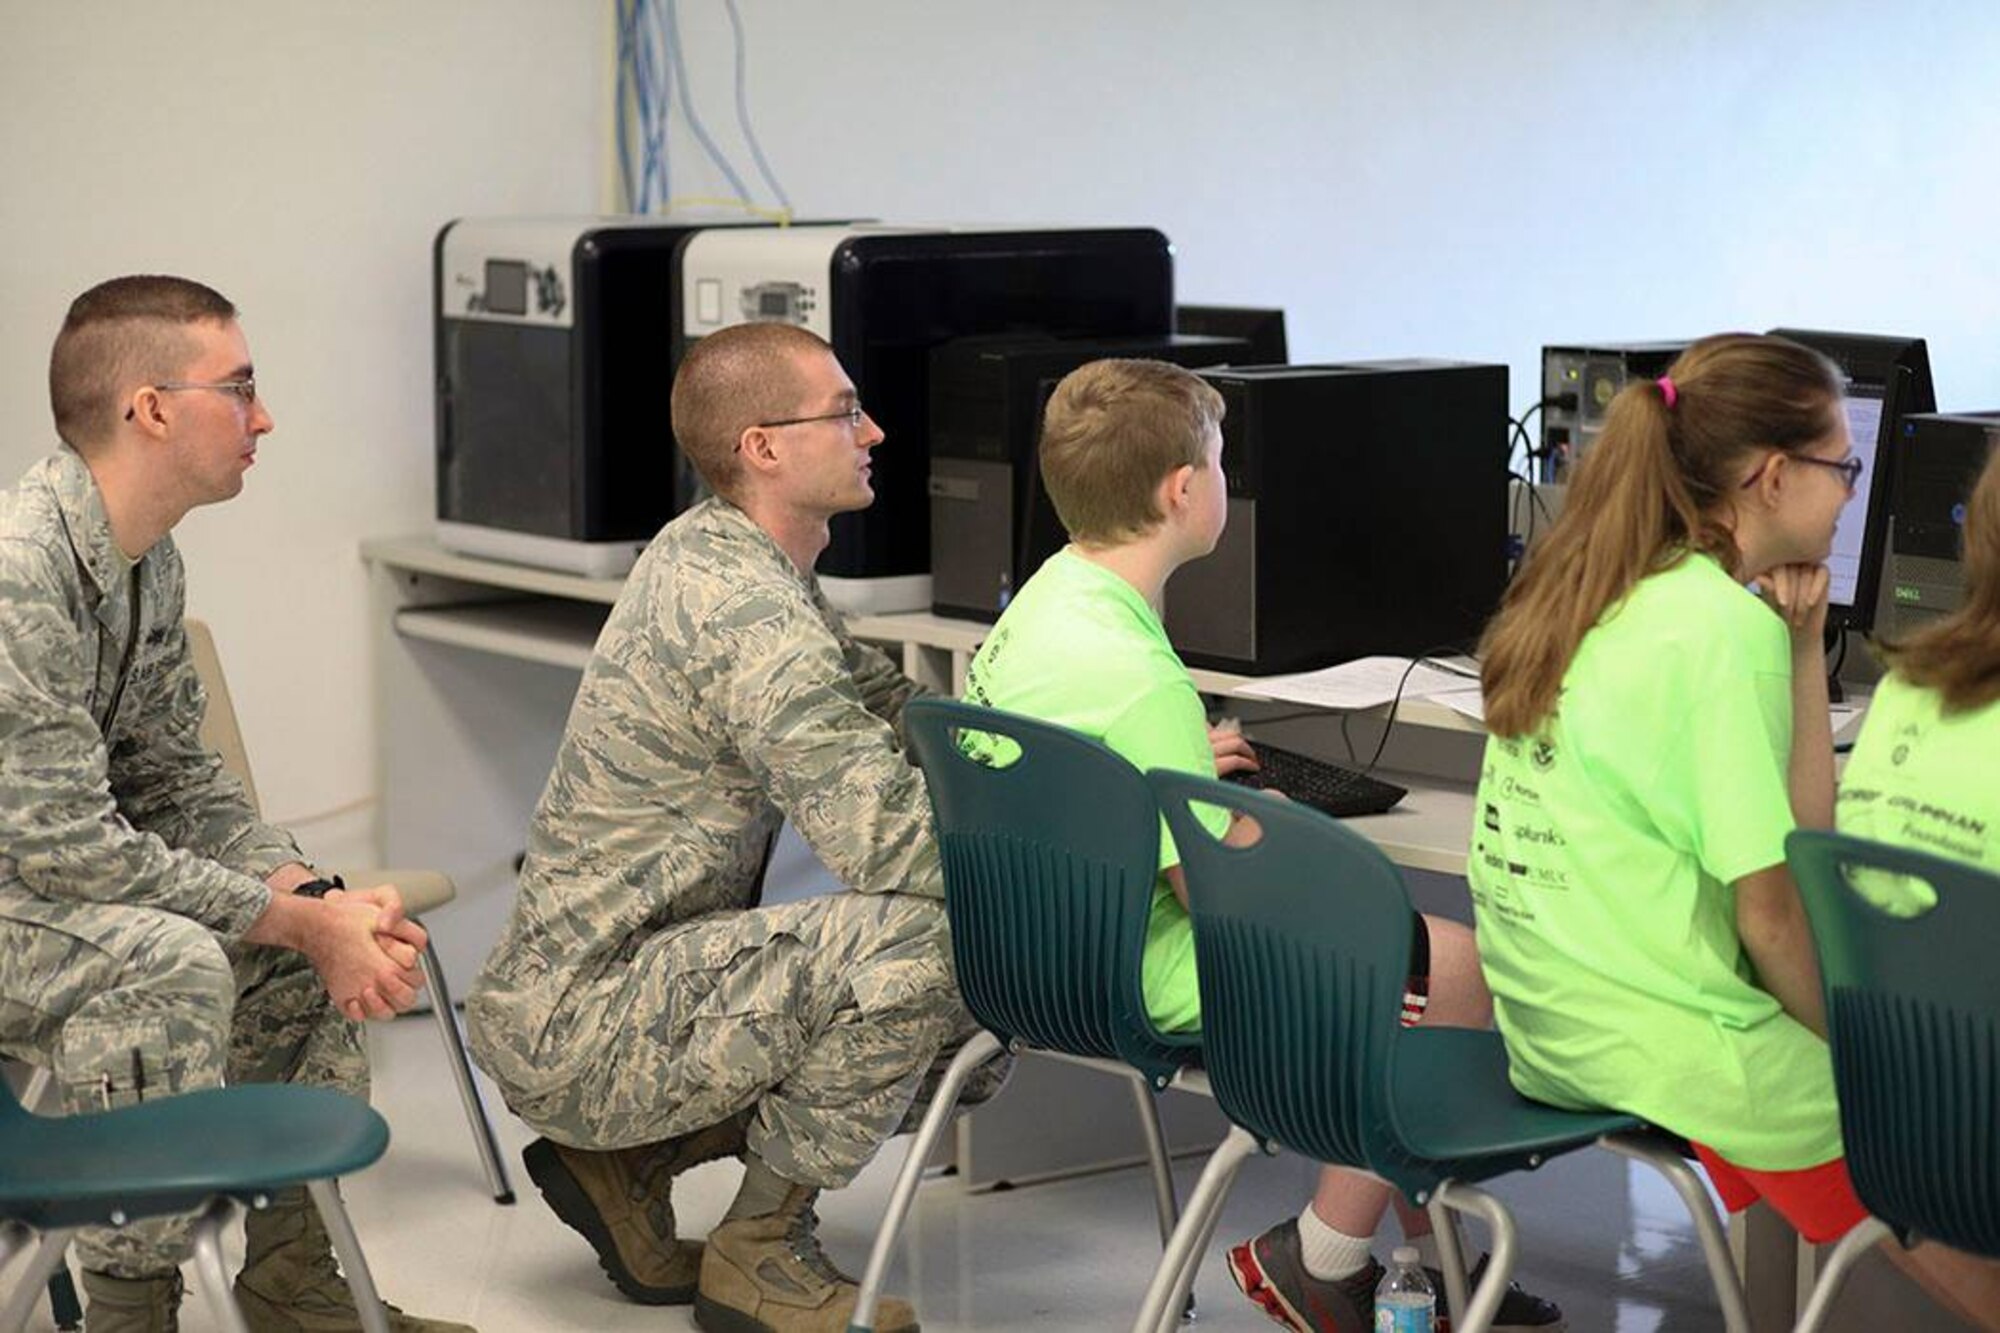 The Smithton School District recently hosted a CyberPatriot summer camp supported in conjunction with the Midwest Cyber Center of Excellence and Scott AFB.